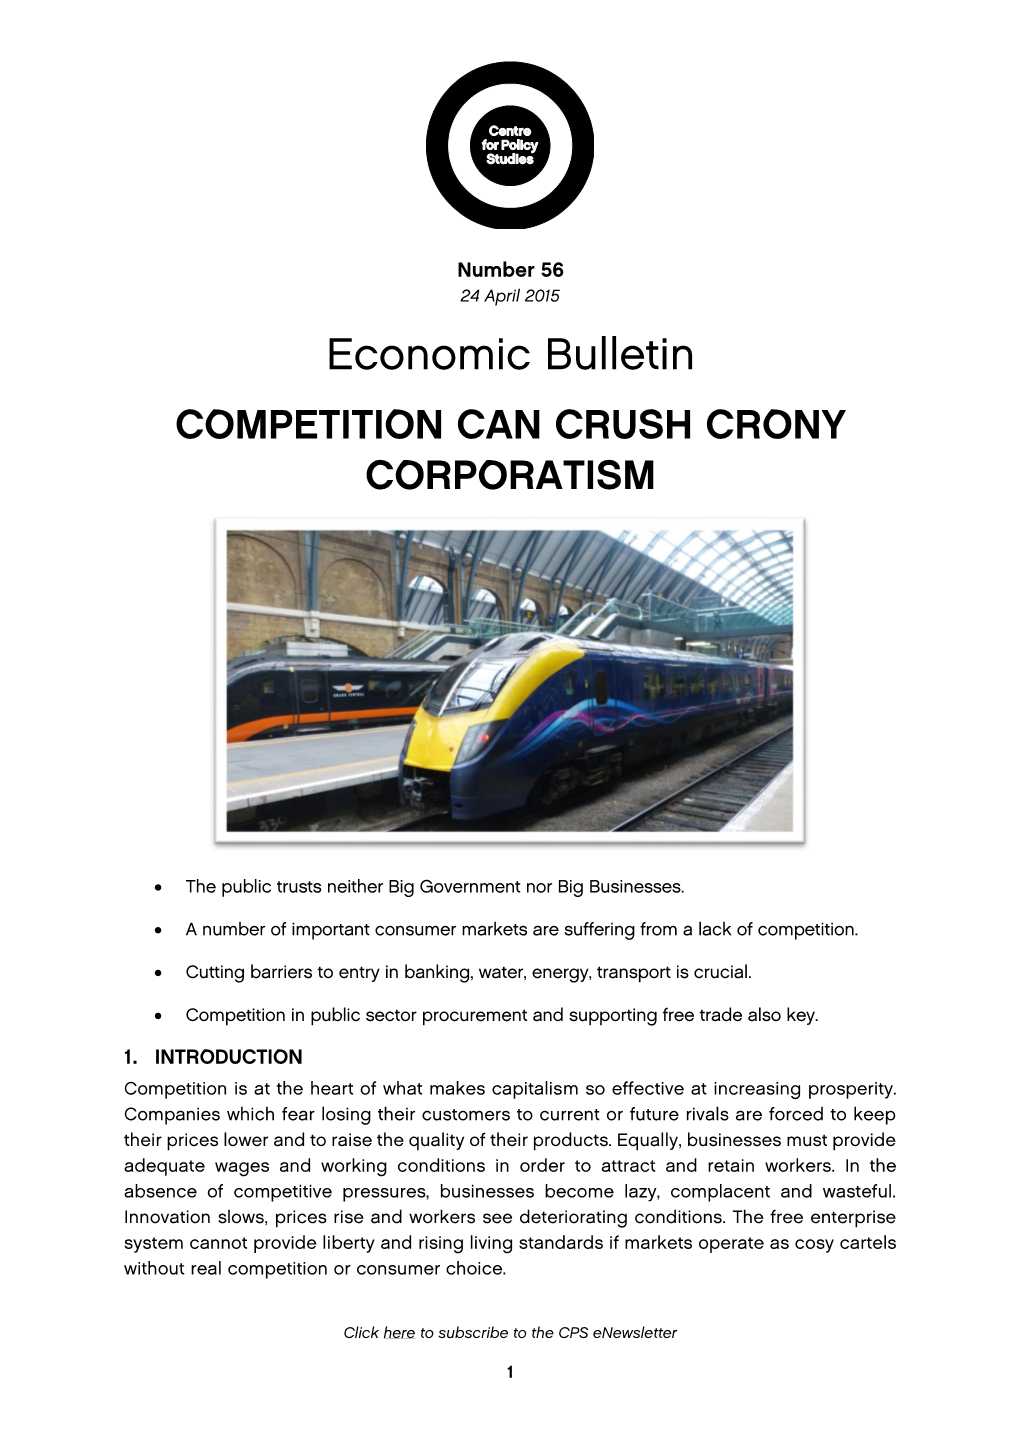 Economic Bulletin COMPETITION CAN CRUSH CRONY CORPORATISM